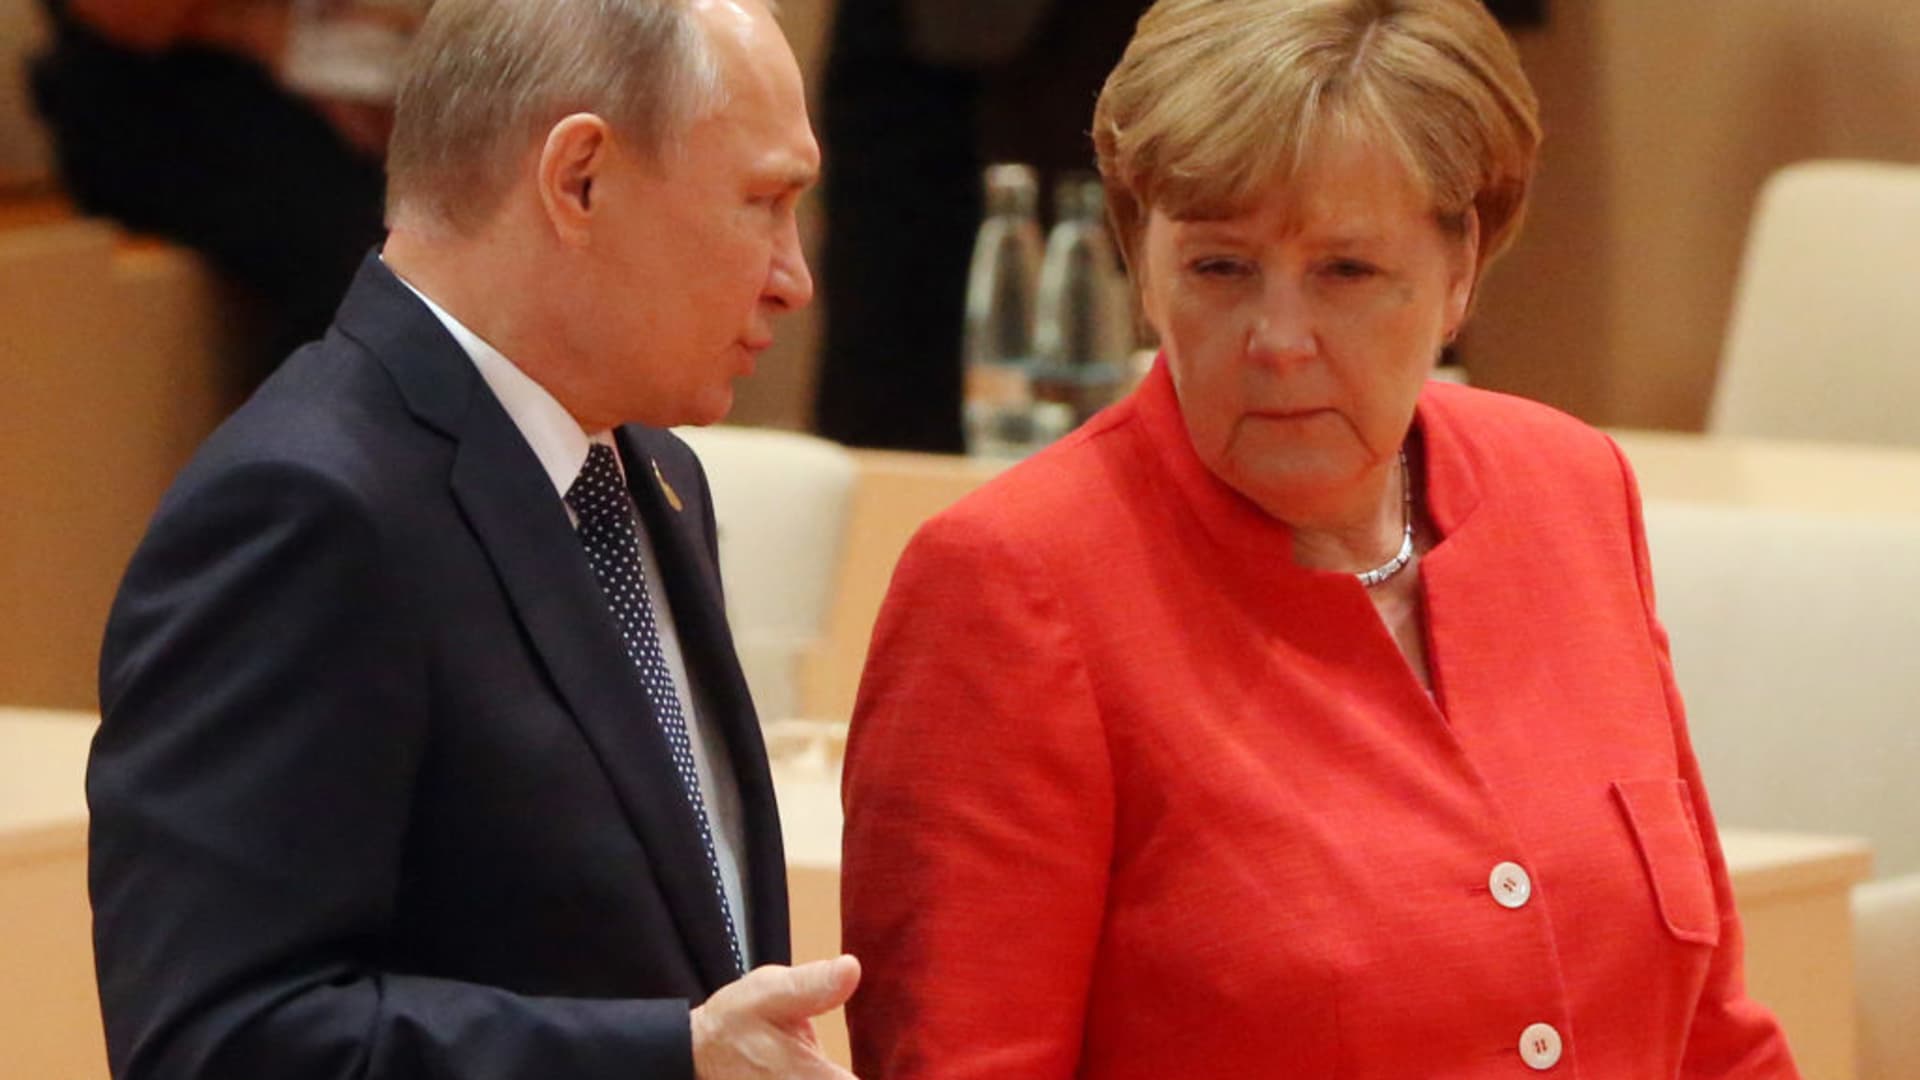 German Chancellor Angela Merkel (R) and Russian President Vladimir Putin (L) arrive to the plenary session at the G20 Summit on July 7, 2017.